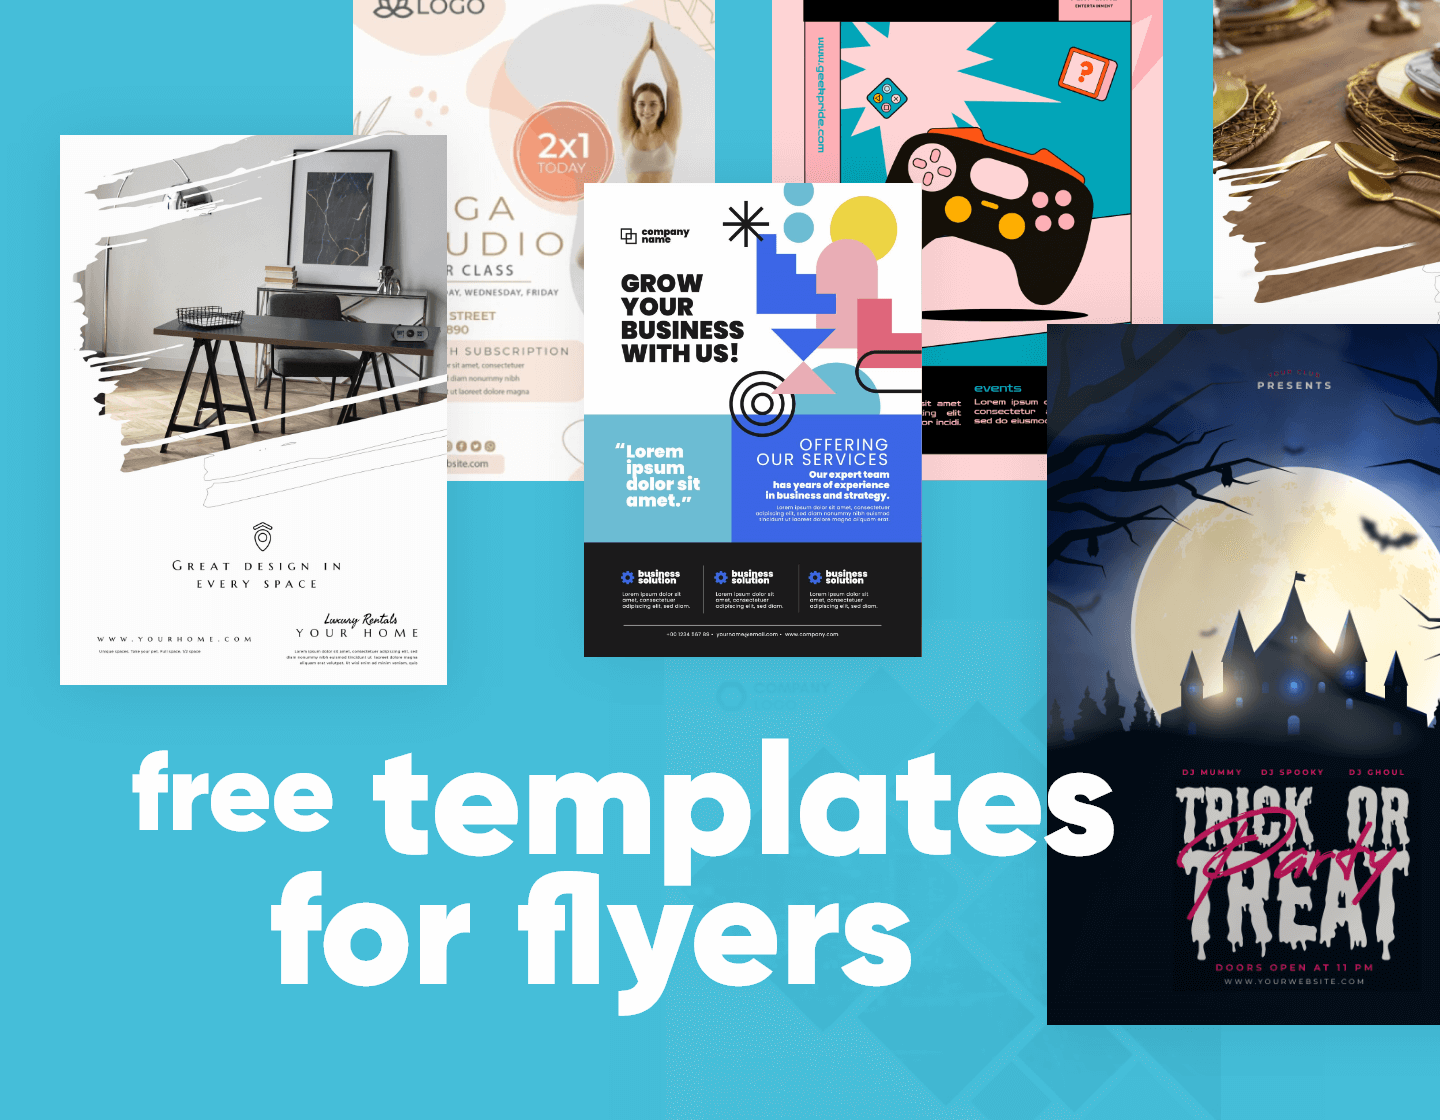 50 Free Templates For Flyers To Customize And Print For Every Occasion throughout Free Printable Flyers